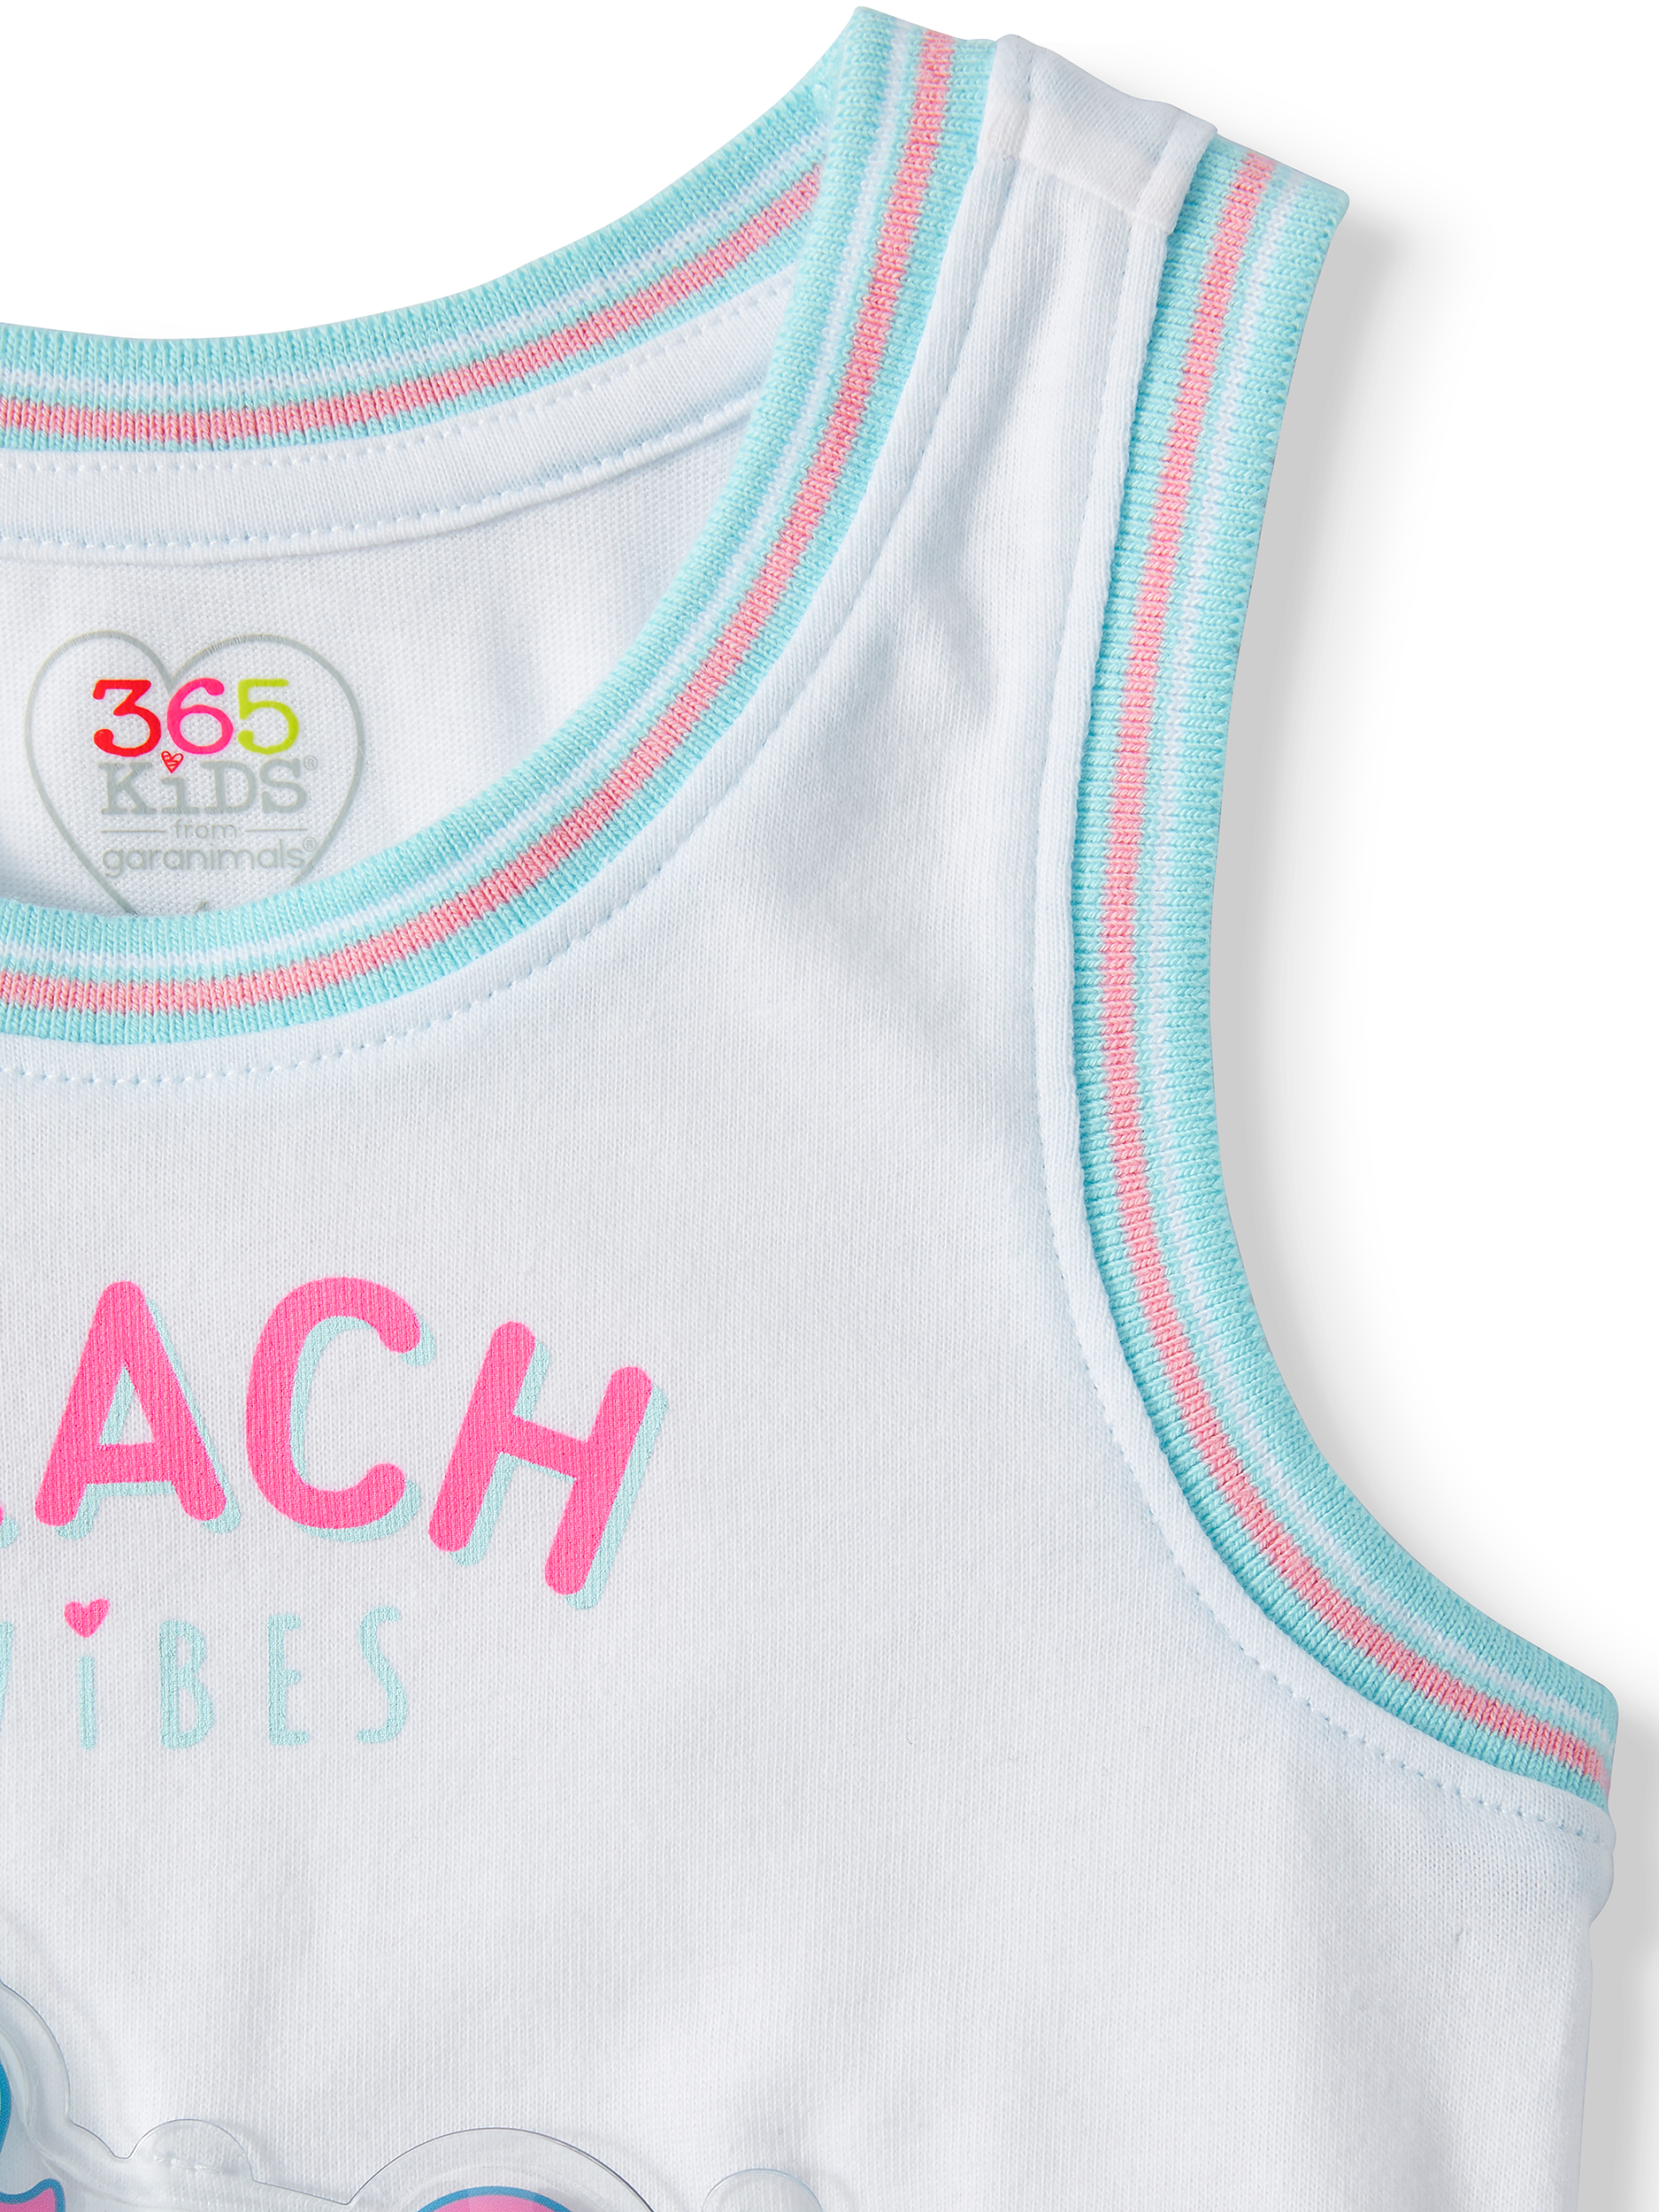 Tie Front Graphic Tank Top (Little Girls & Big Girls) - image 3 of 3